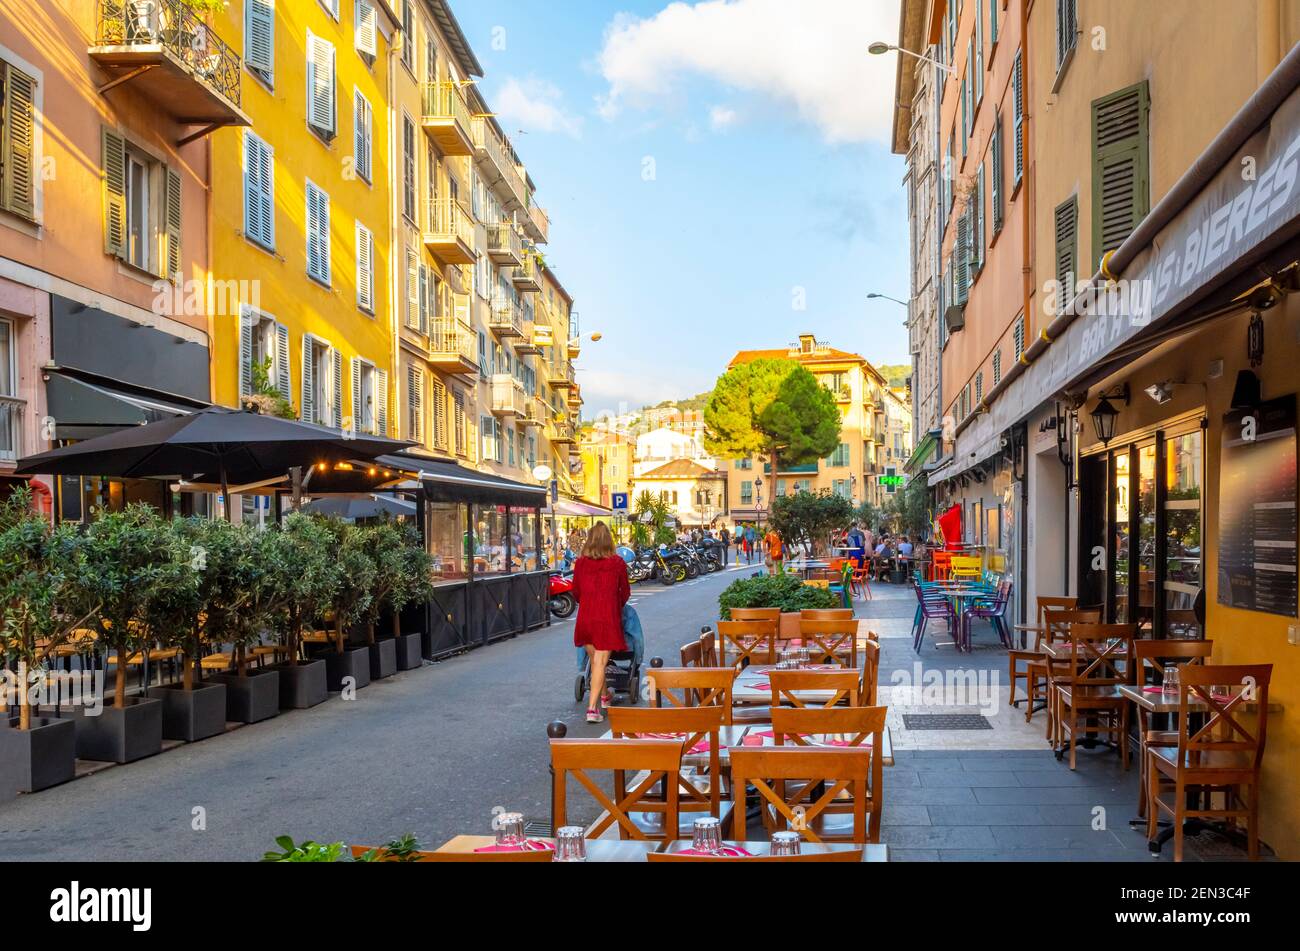 Cafes and shops fill the crowded historic center of Old Town Vieux Nice on the French Riviera in Nice, France. Stock Photo